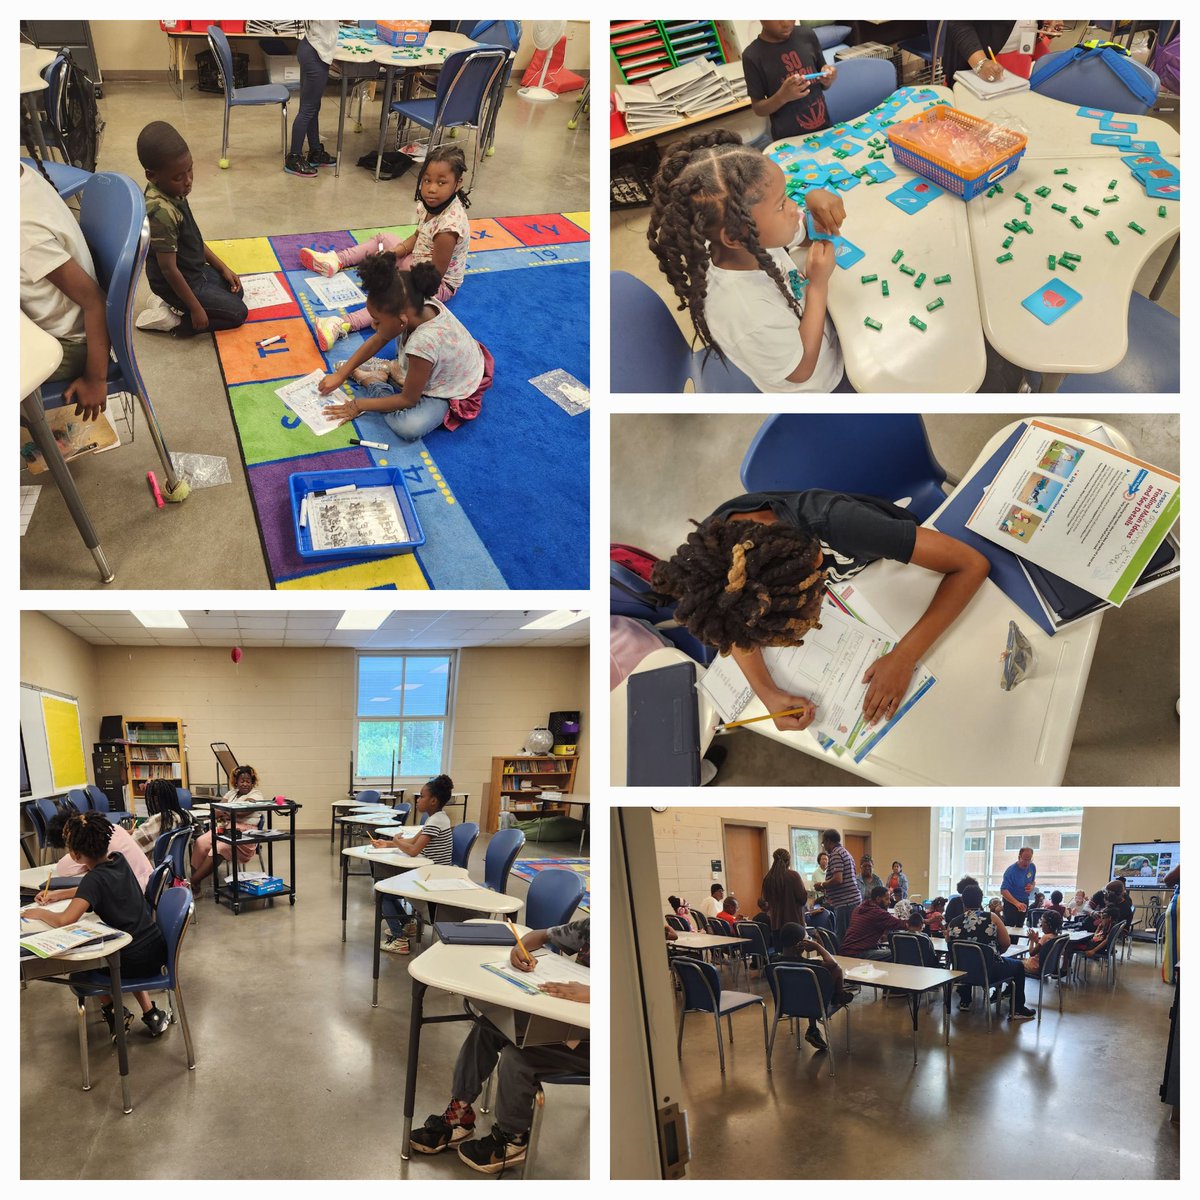 Summer Literacy Camp @OliverLions was so fun and exciting. Students were reading books, decoding, and finding evidence in the text to support the main idea in the story. 👏🏼🎊
#UntilAllCanRead
#EveryChild 
#EveryChance
#EveryDay
@Alabama_Reading @BhamCitySchools